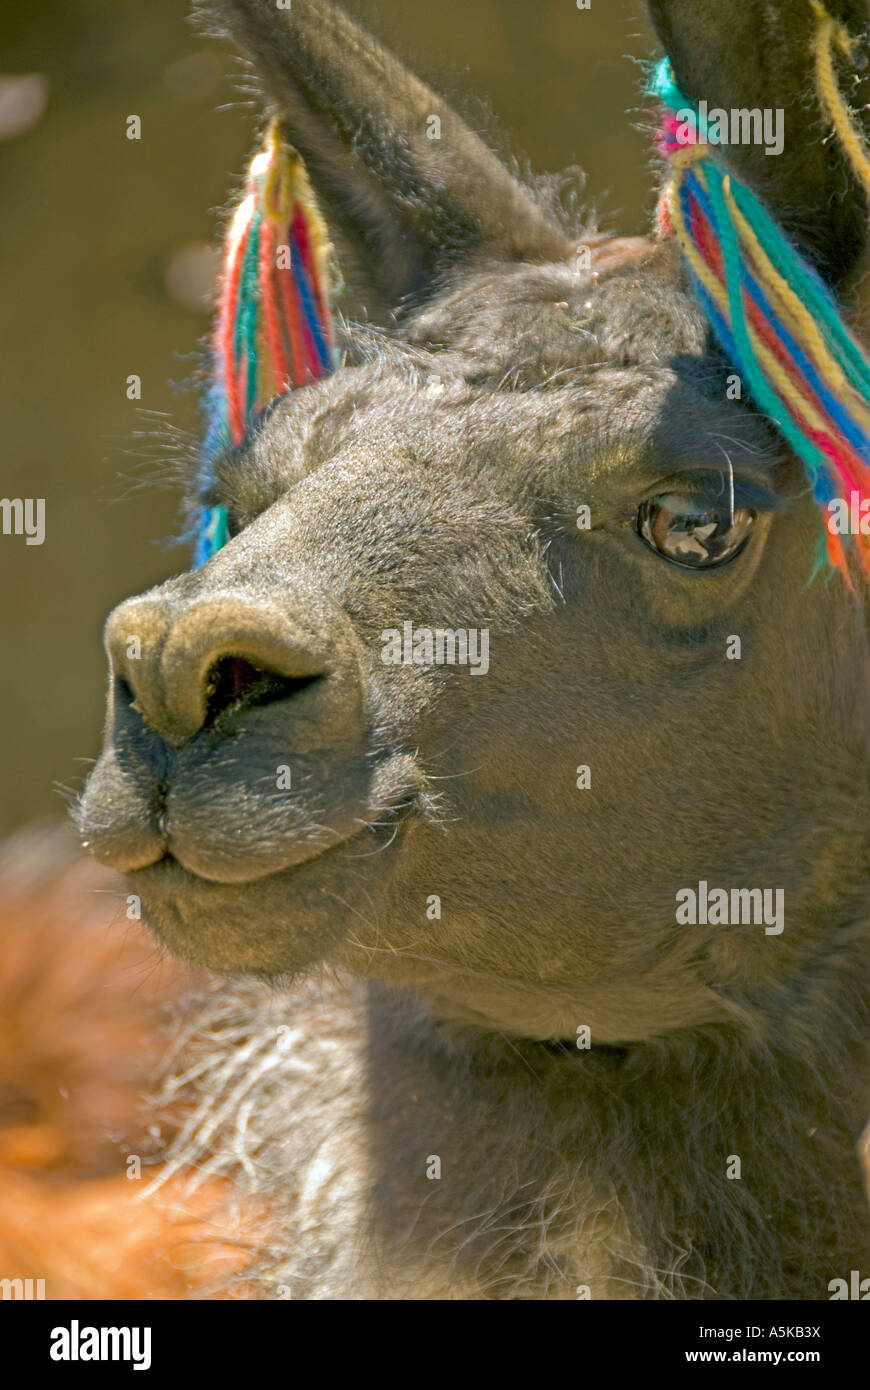 Chile llama mouth and nose closeup detail, humor humour Stock Photo